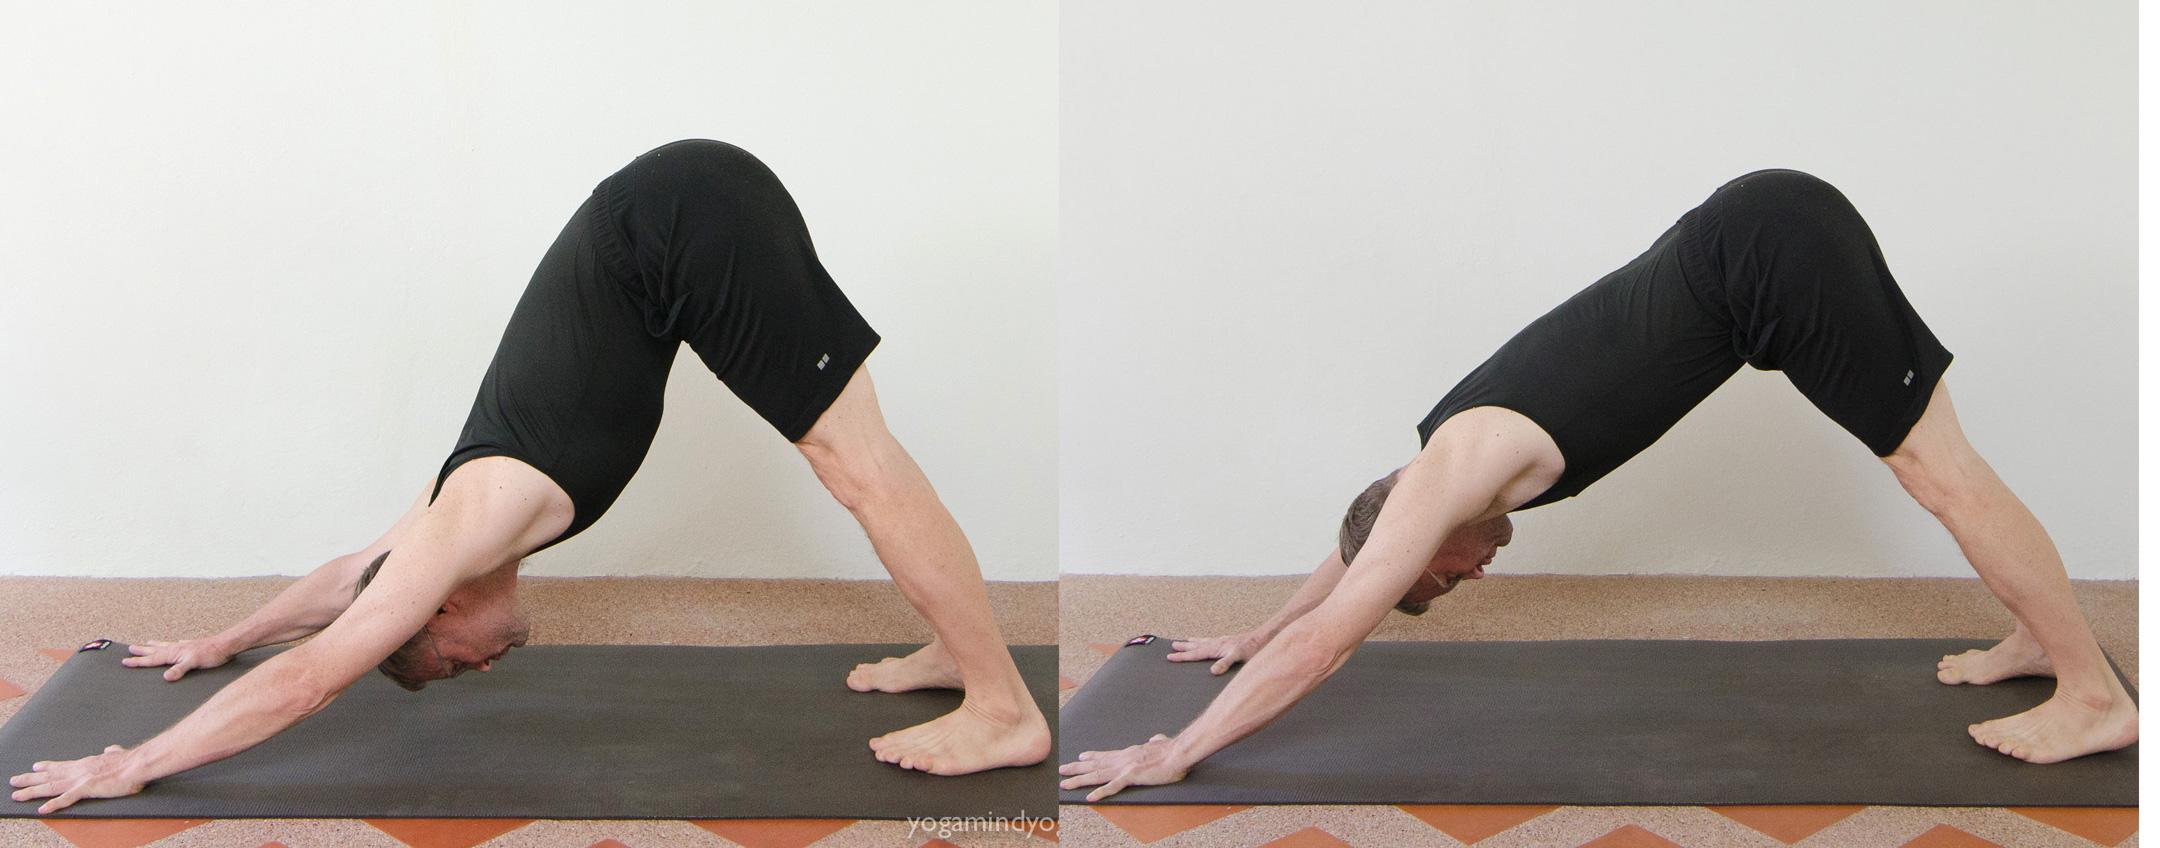 Yoga Poses To Avoid With Sciatica (A Physical Therapist Explains) - EMPOWER  YOURWELLNESS